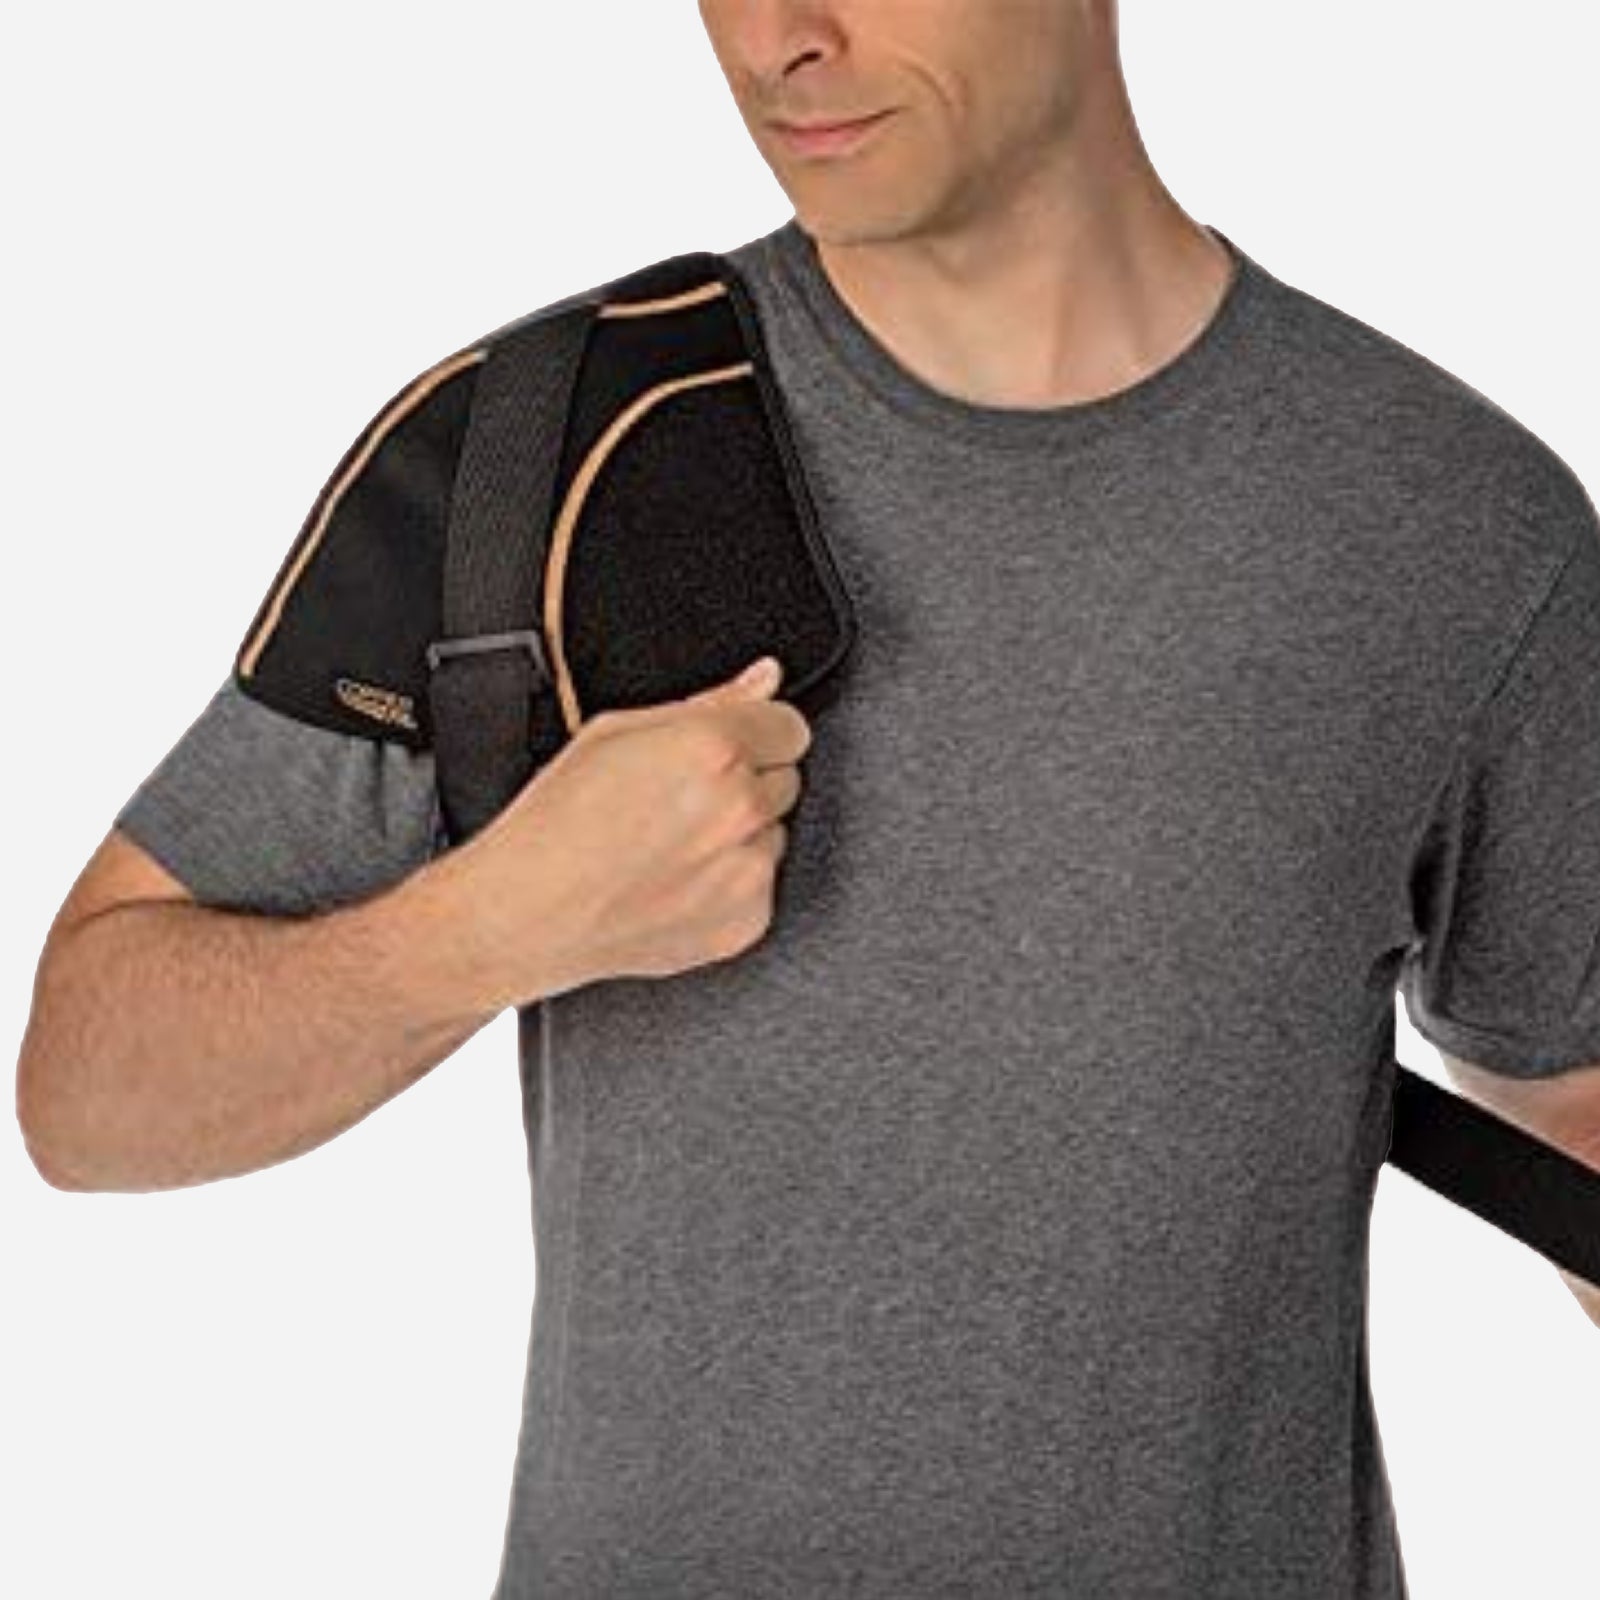 Copper Fit Pro Back Support, Black with Copper Trim, Large/X-Large :  : Health & Personal Care